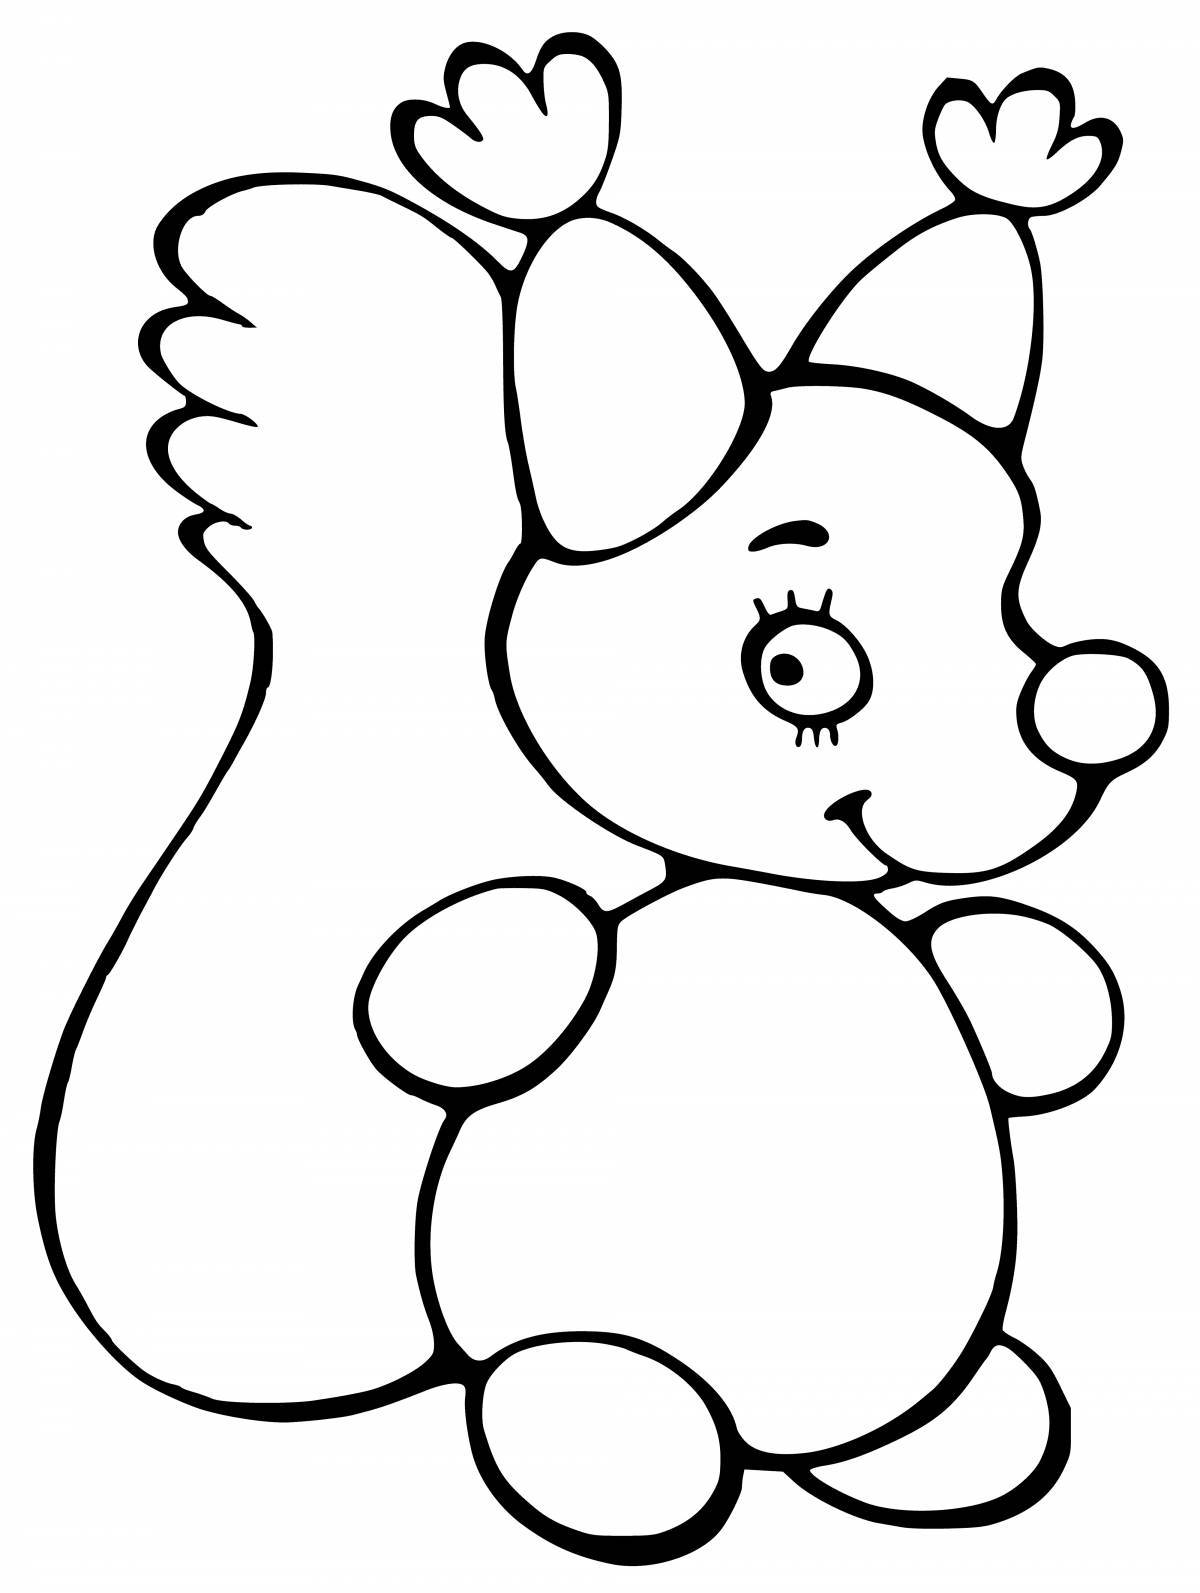 Adorable coloring picture for kids